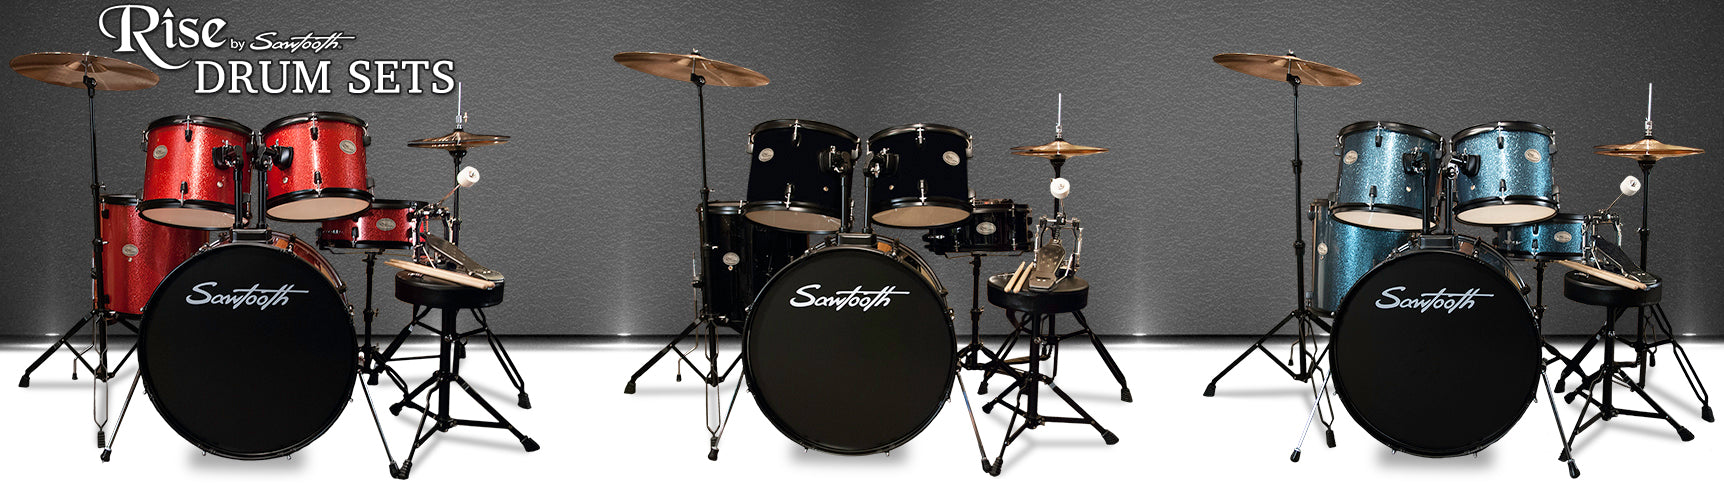 Rise By Sawtooth Drum Sets